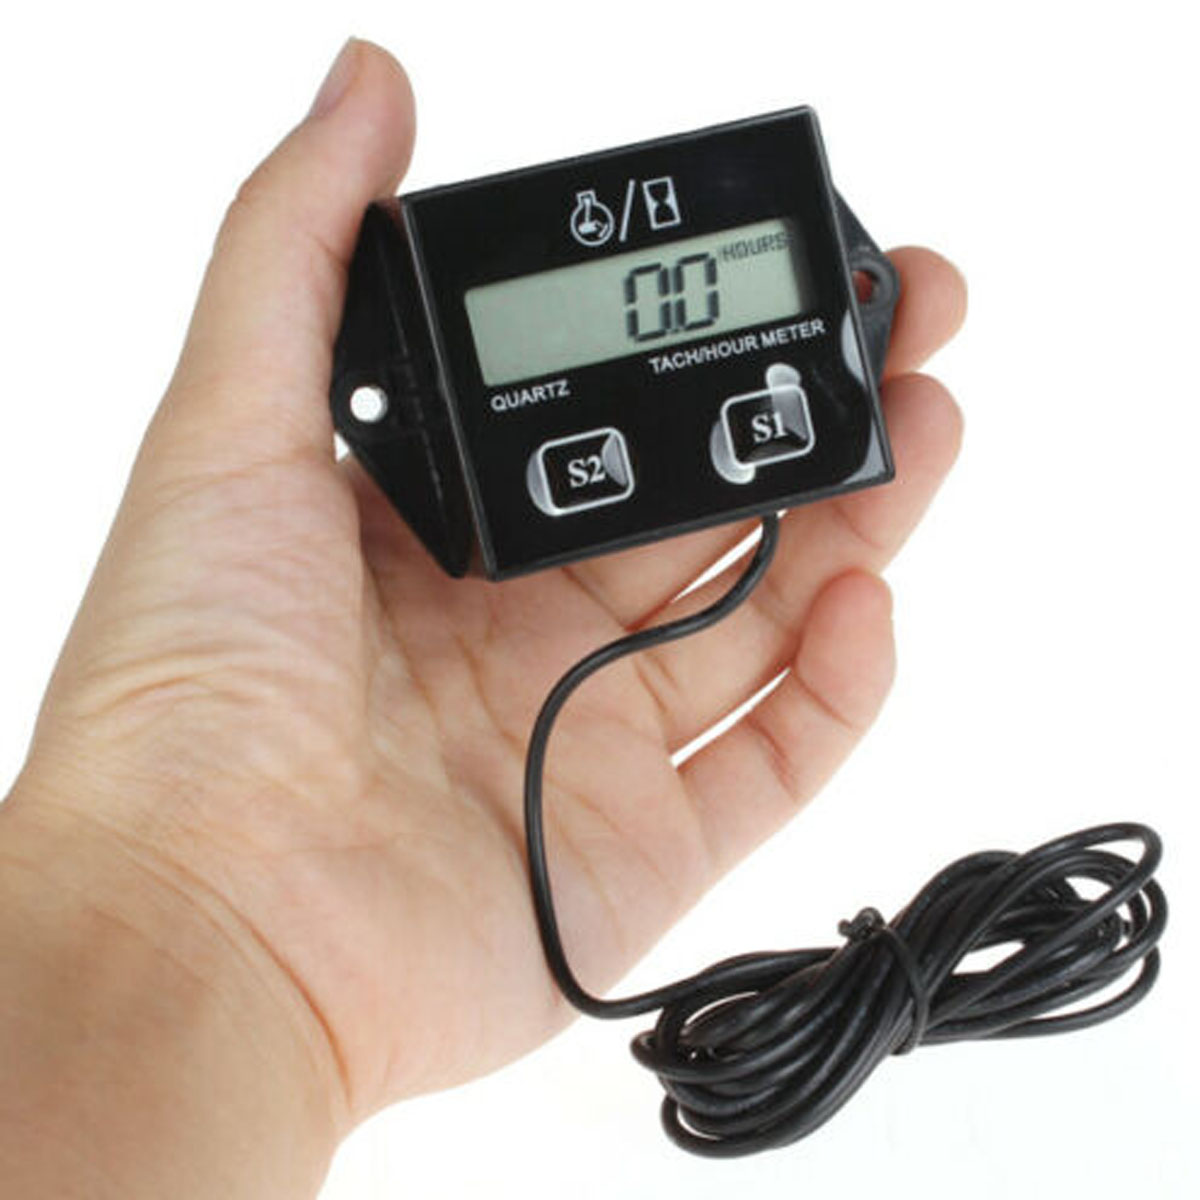 Motorcycle-Car-Gauge-Chainsaw-Tachometer-Engine-Hour-Meter-Digital-Electronic-1677669